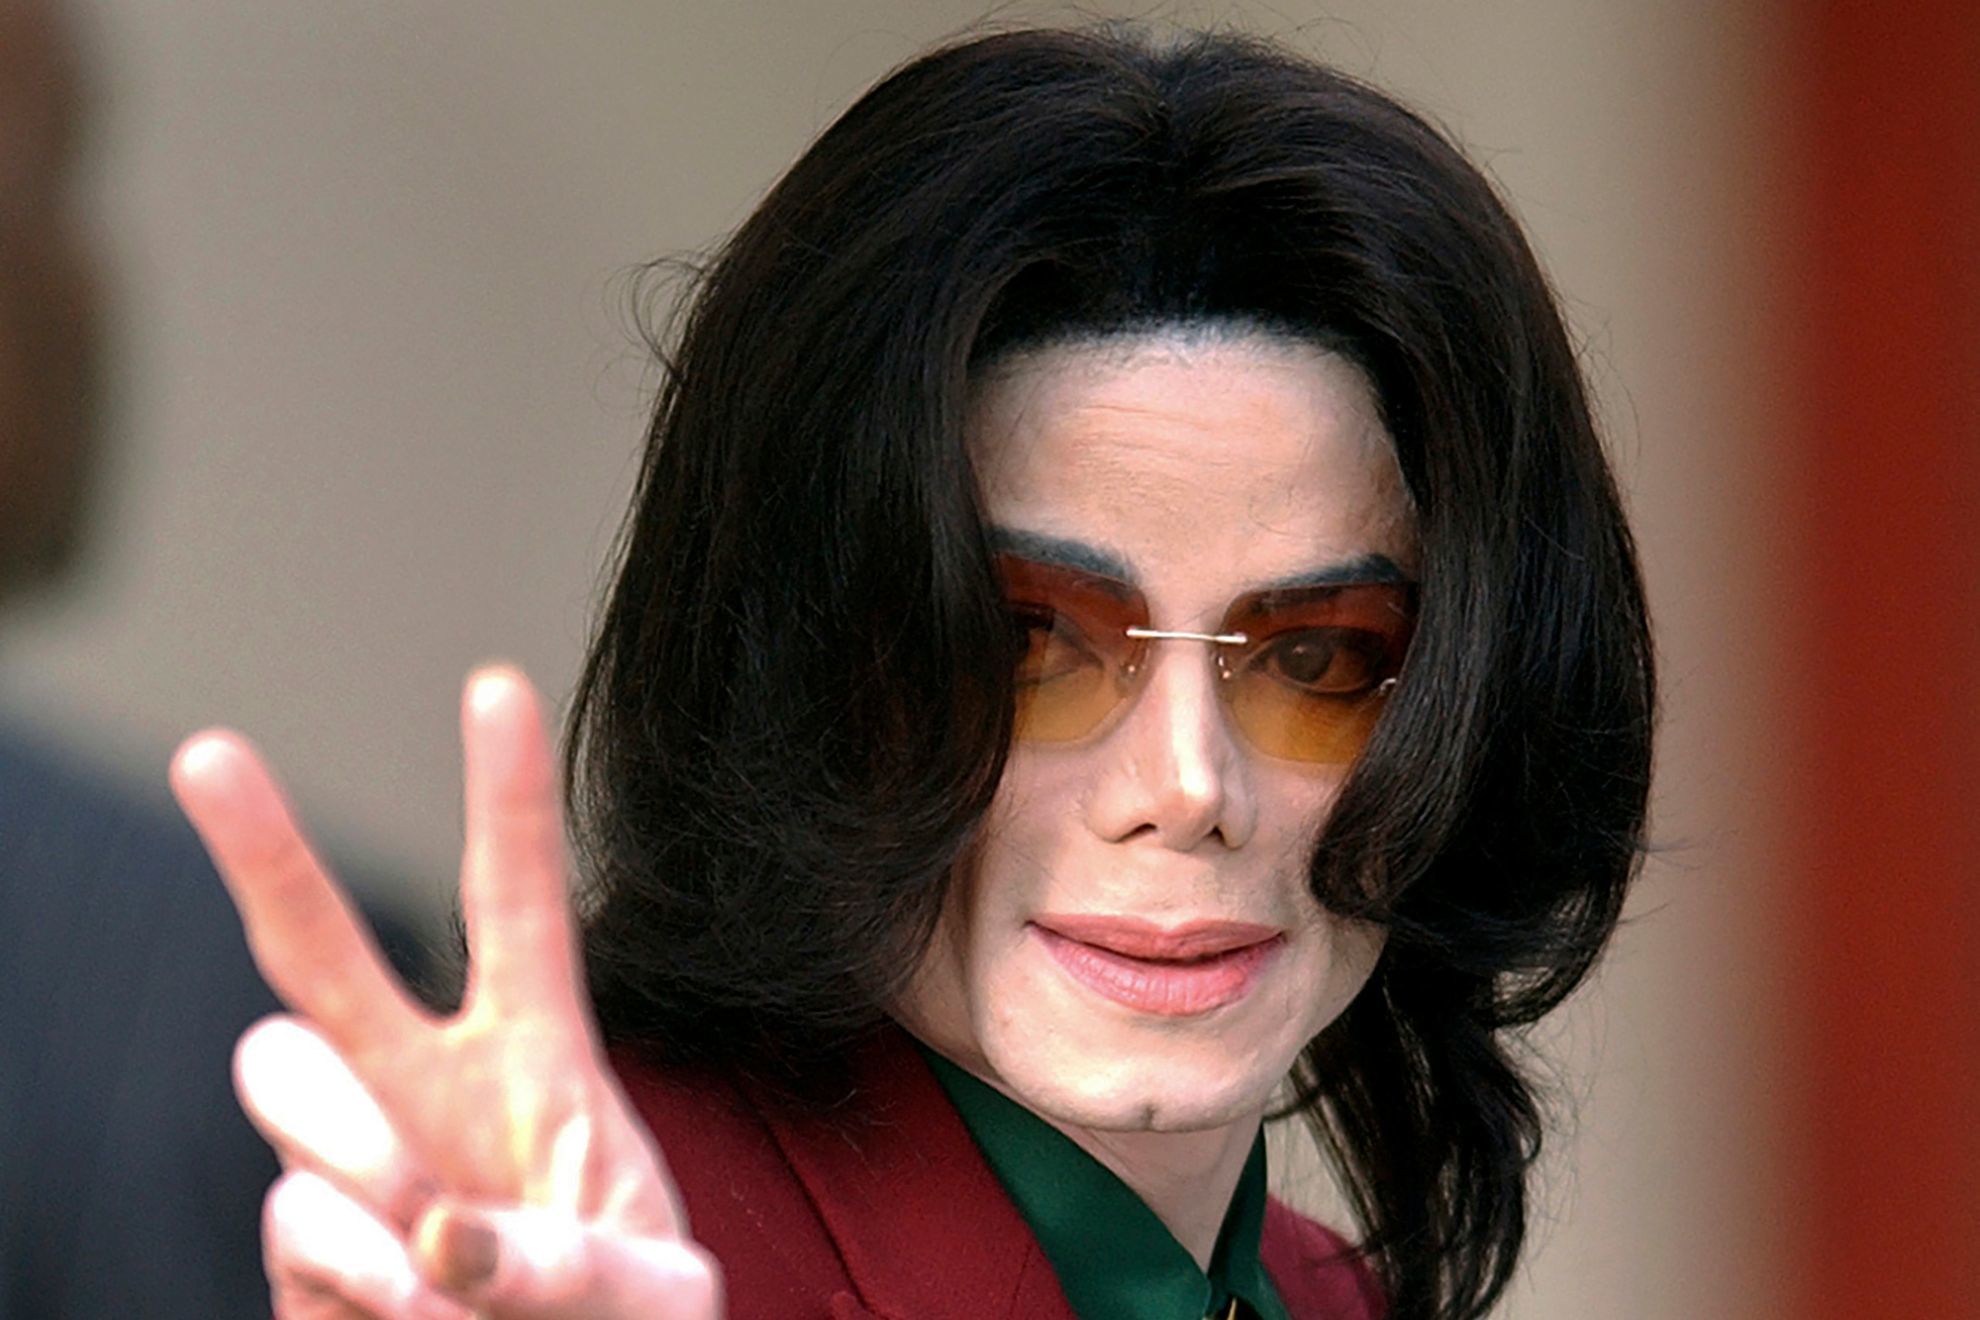 Michael Jacksons catalog purchased by Sony in a record-breaking deal